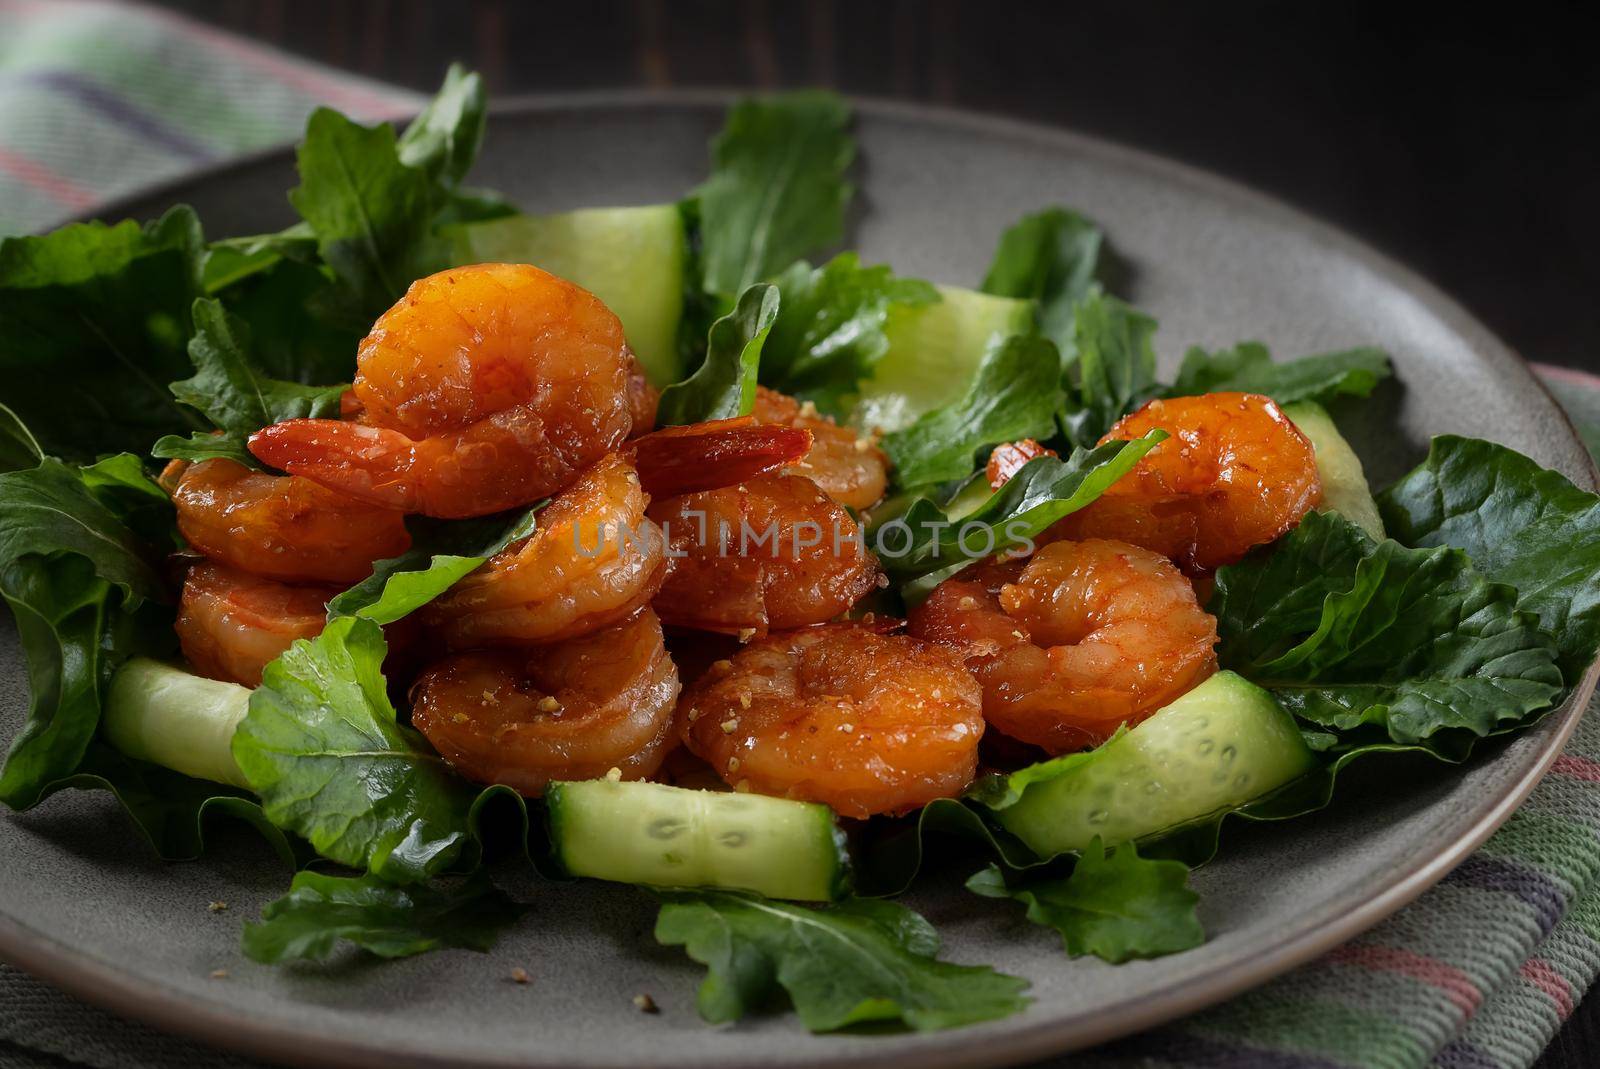 Fresh salad with grilled prawns, cucumbers and arugula beautifully served on a plate.